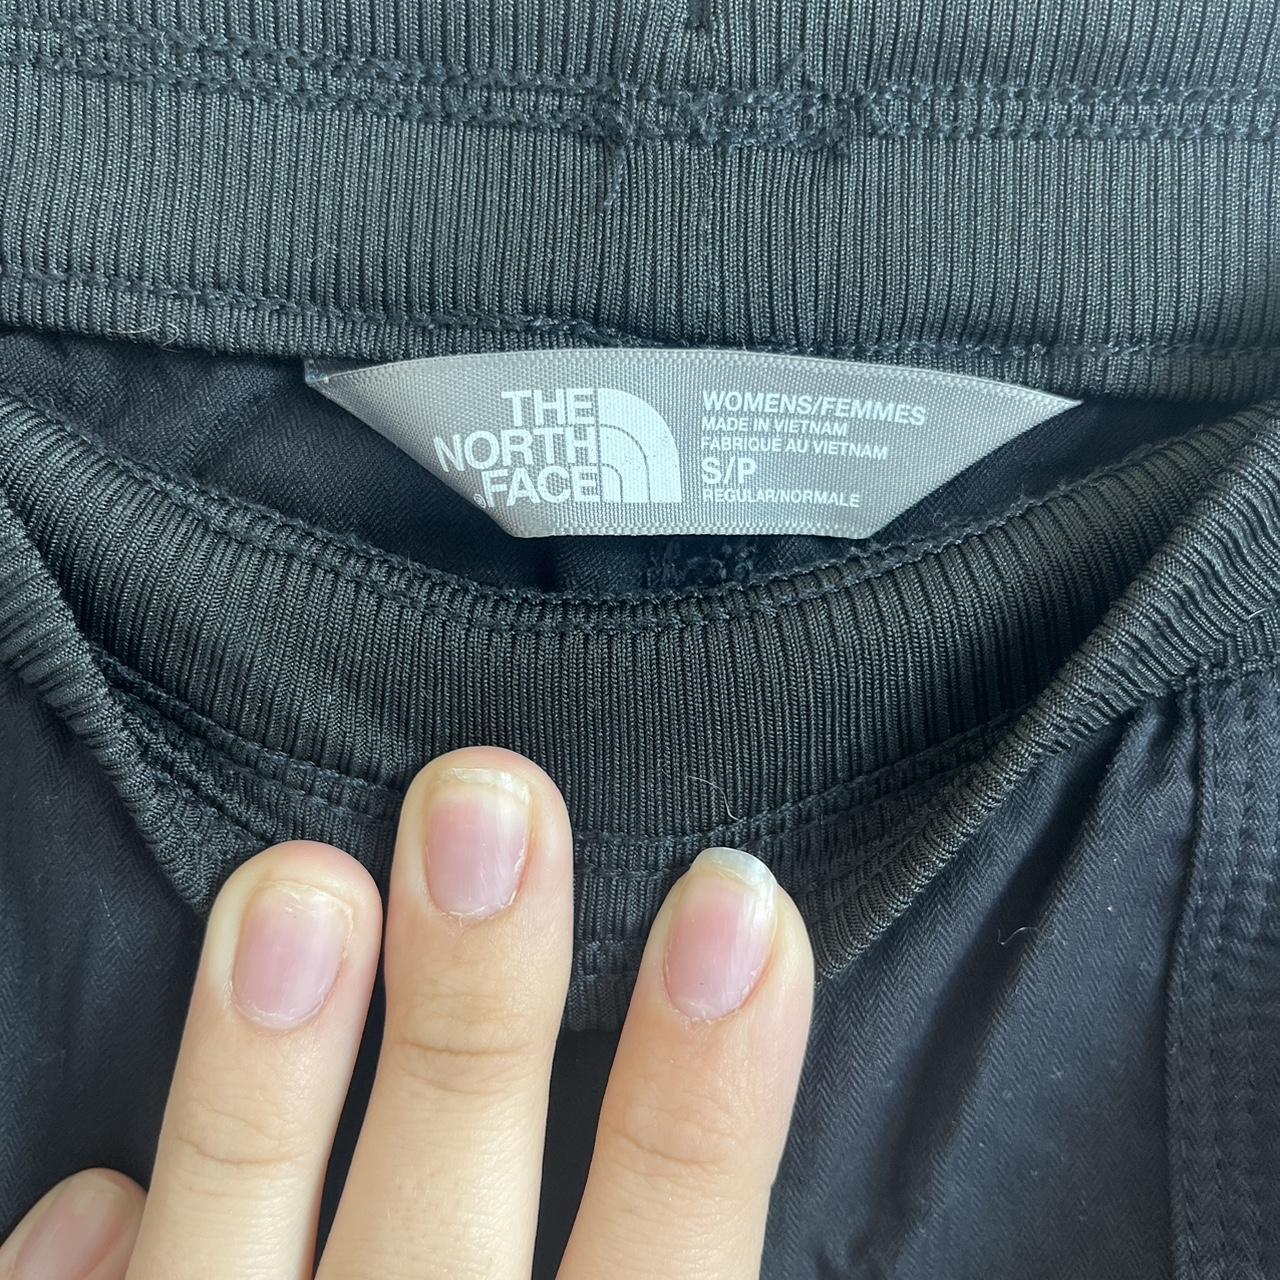 The North Face Women's Black Trousers (4)